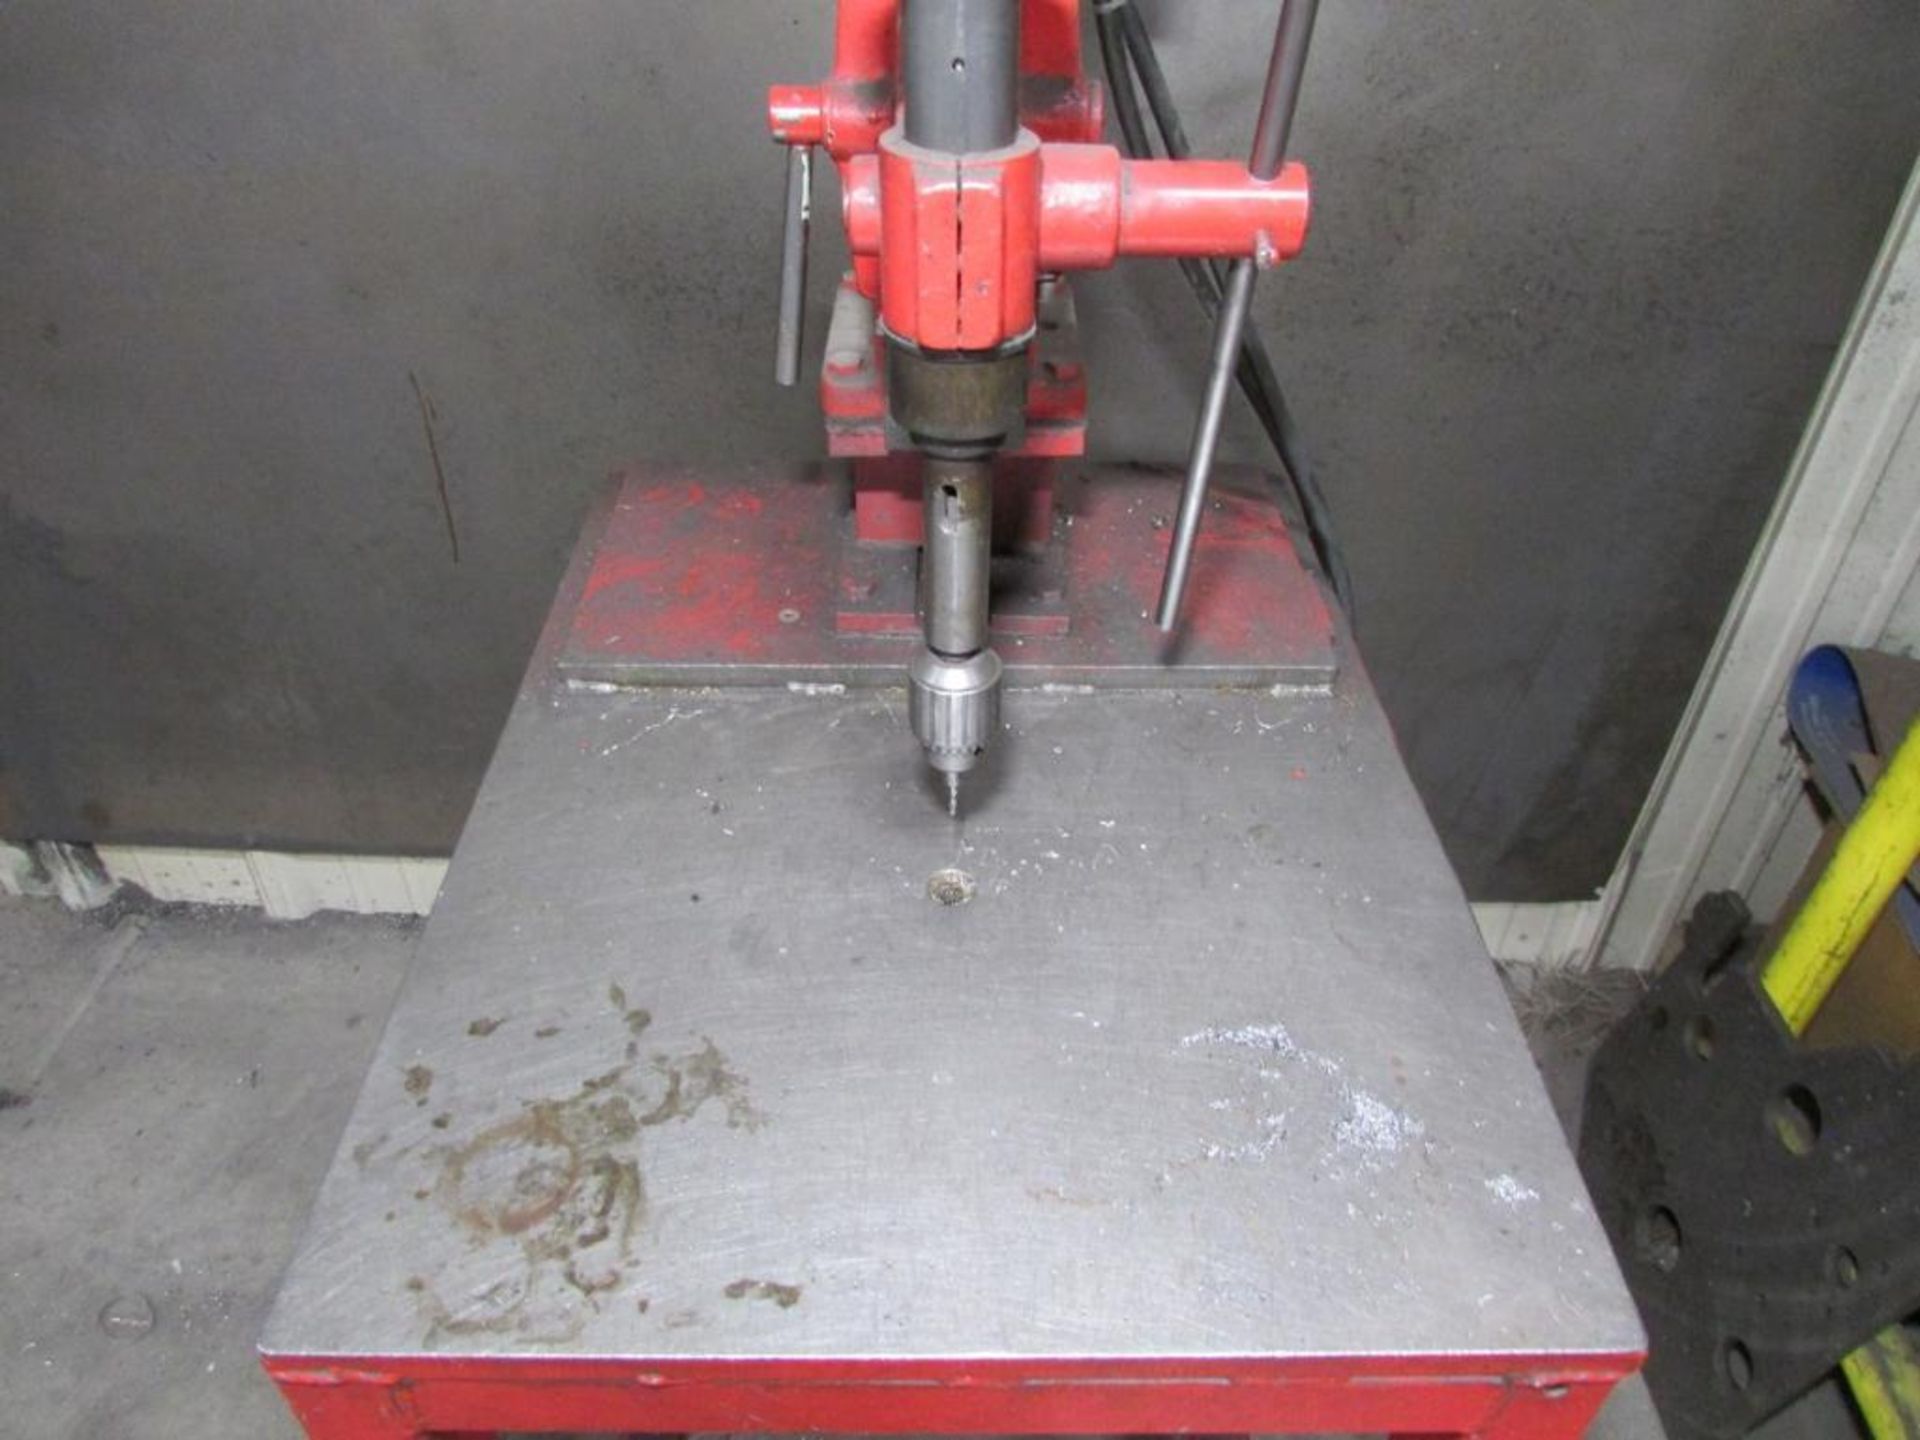 14" Benchtop Drill Press, 29" x 22" Steel Table, 1/2" Jacobs Chuck, 5" Stroke, 1/2HP - Image 5 of 6